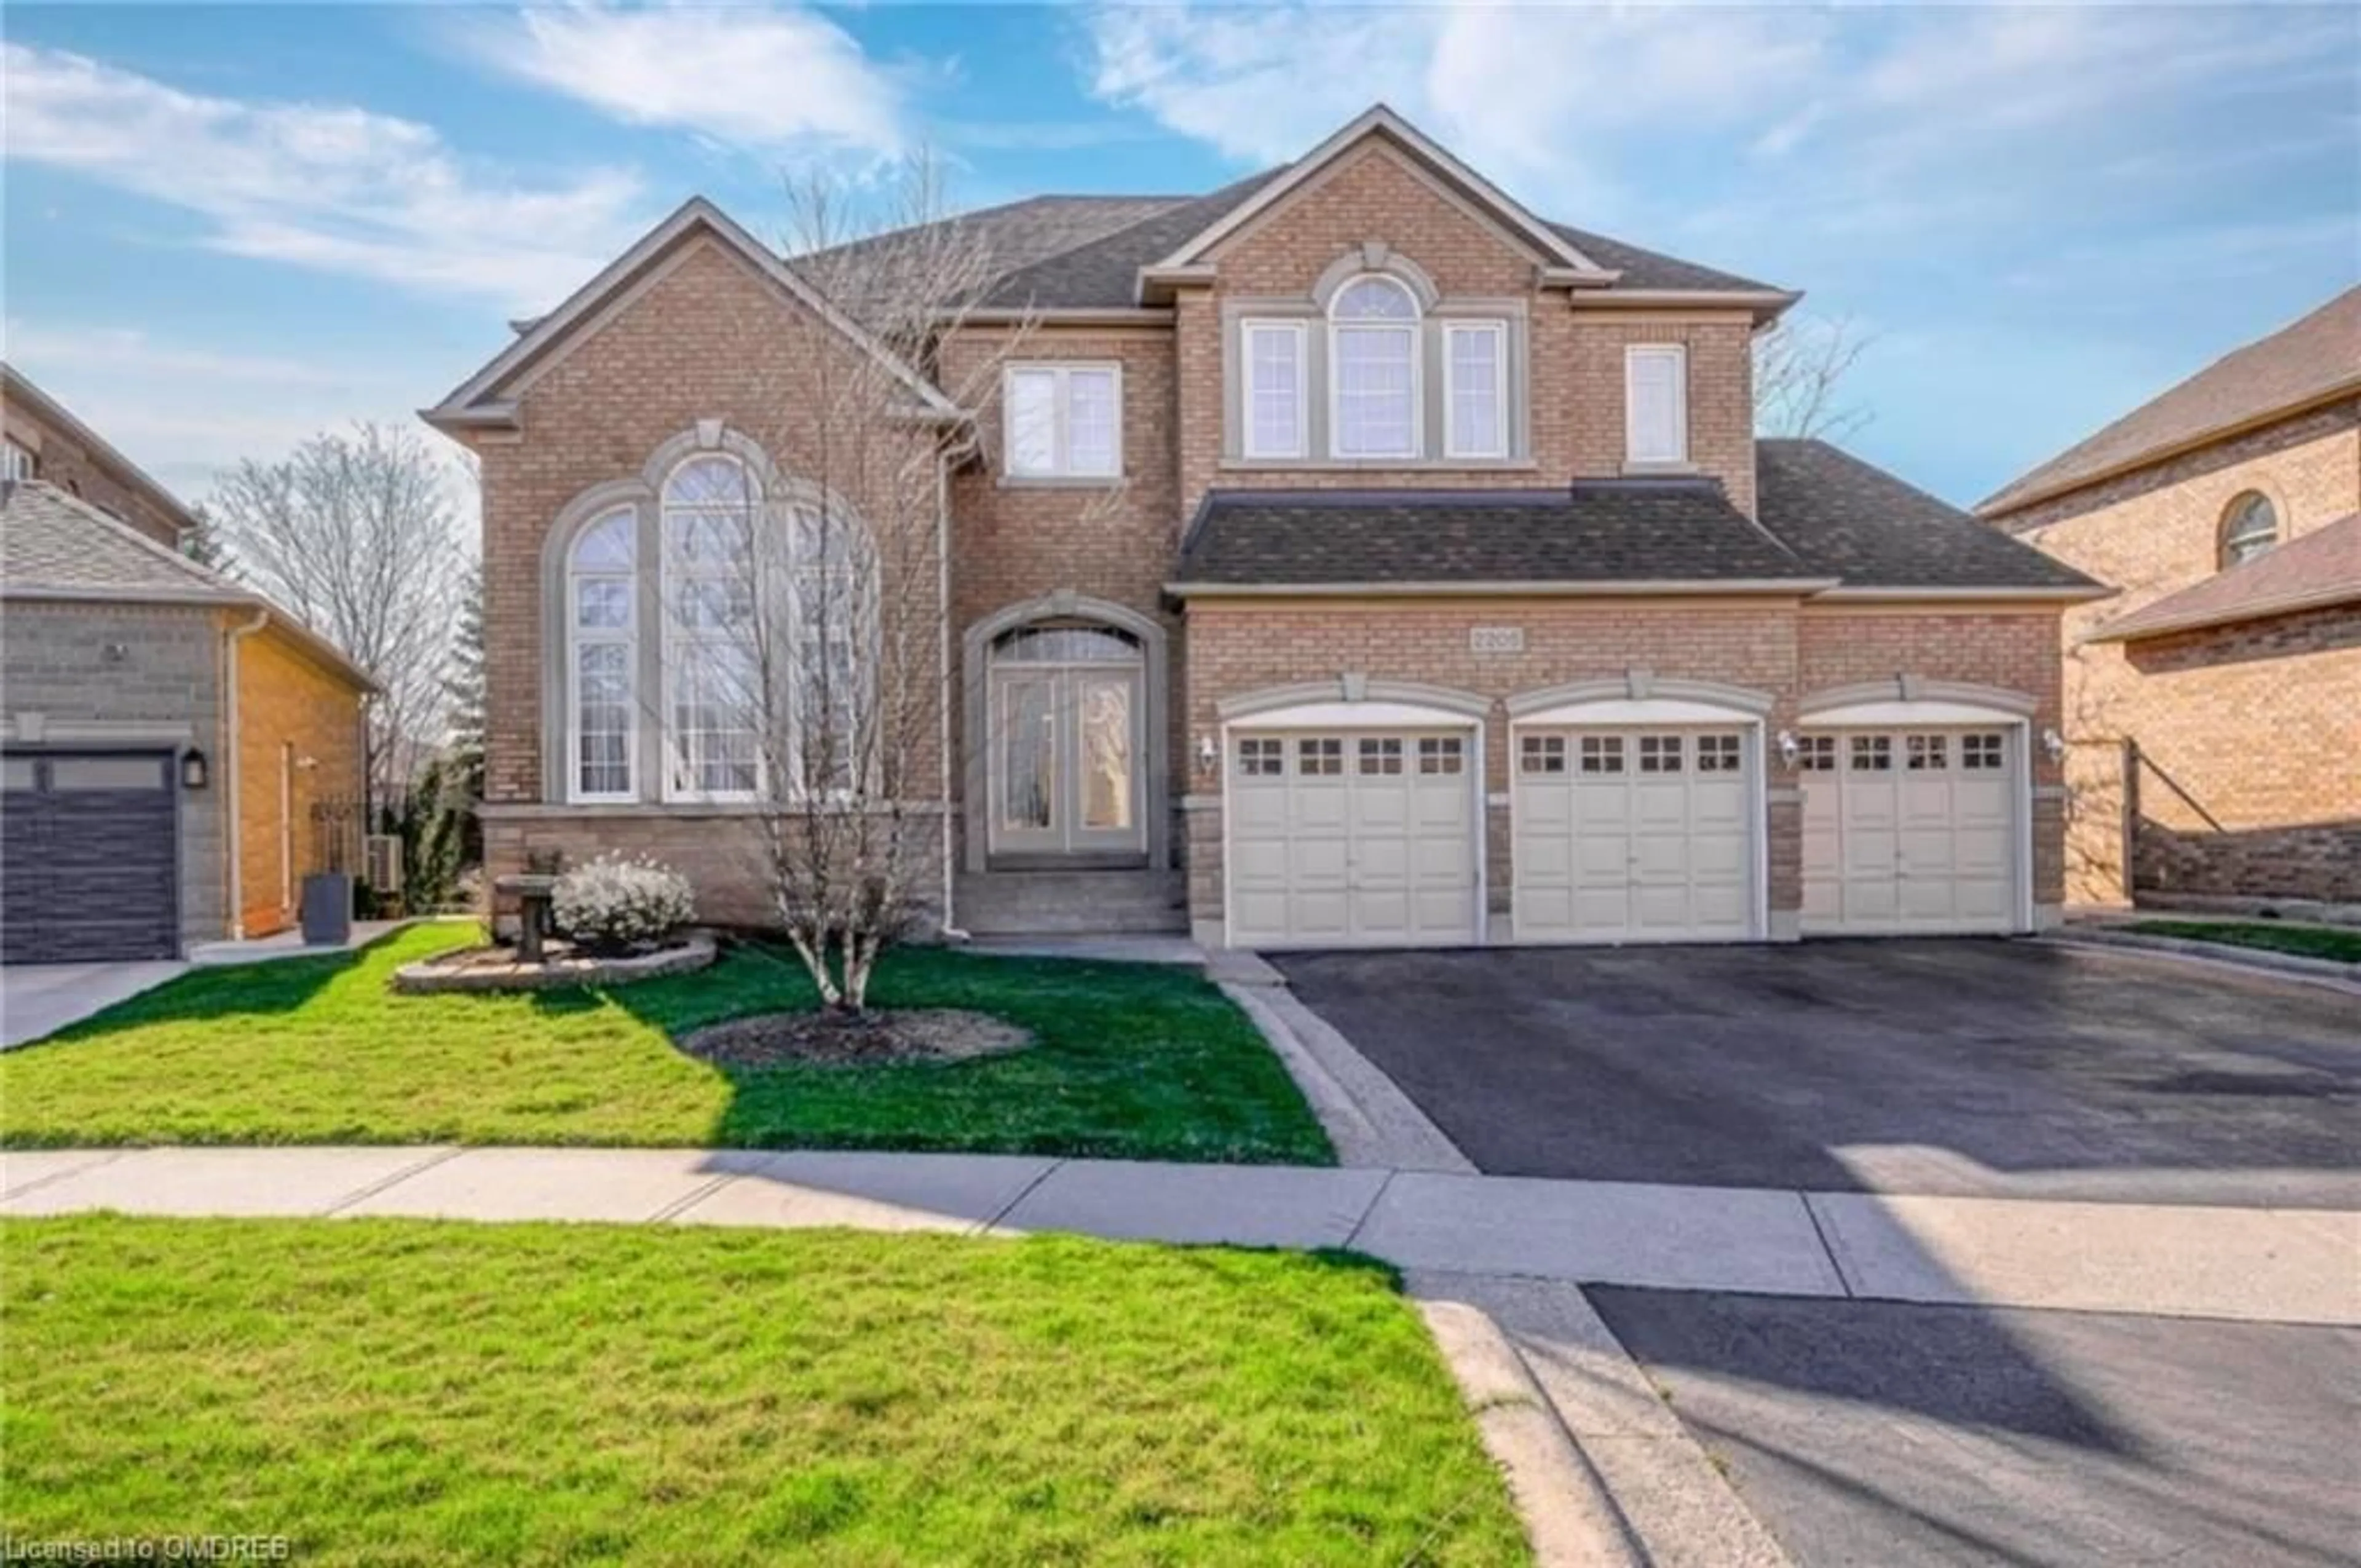 Frontside or backside of a home for 2205 Galloway Dr, Oakville Ontario L6H 5M1